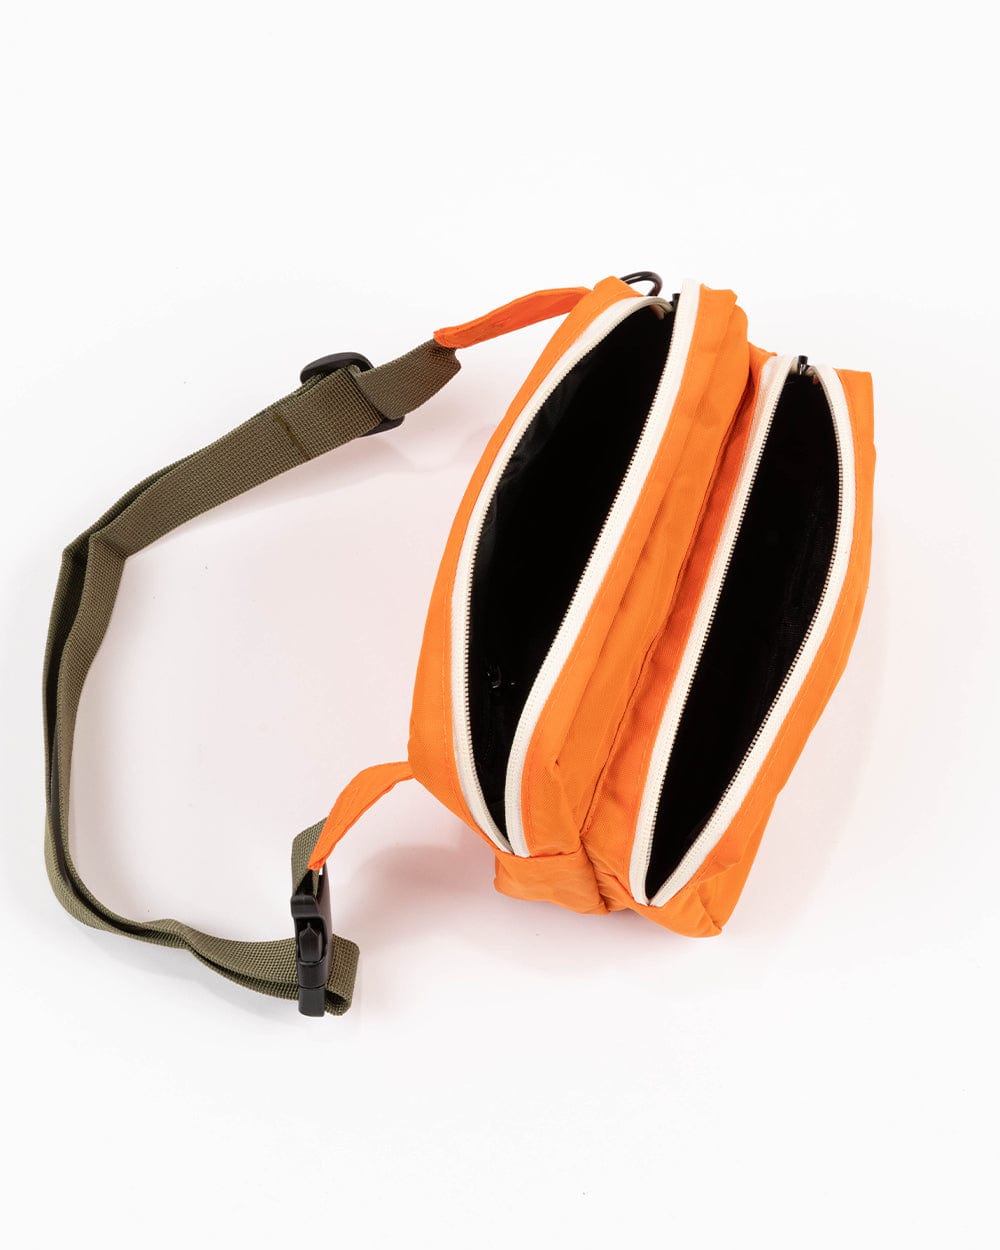 Keep Nature Wild PREORDER: KNW Fanny Pack | Poppy/Olive